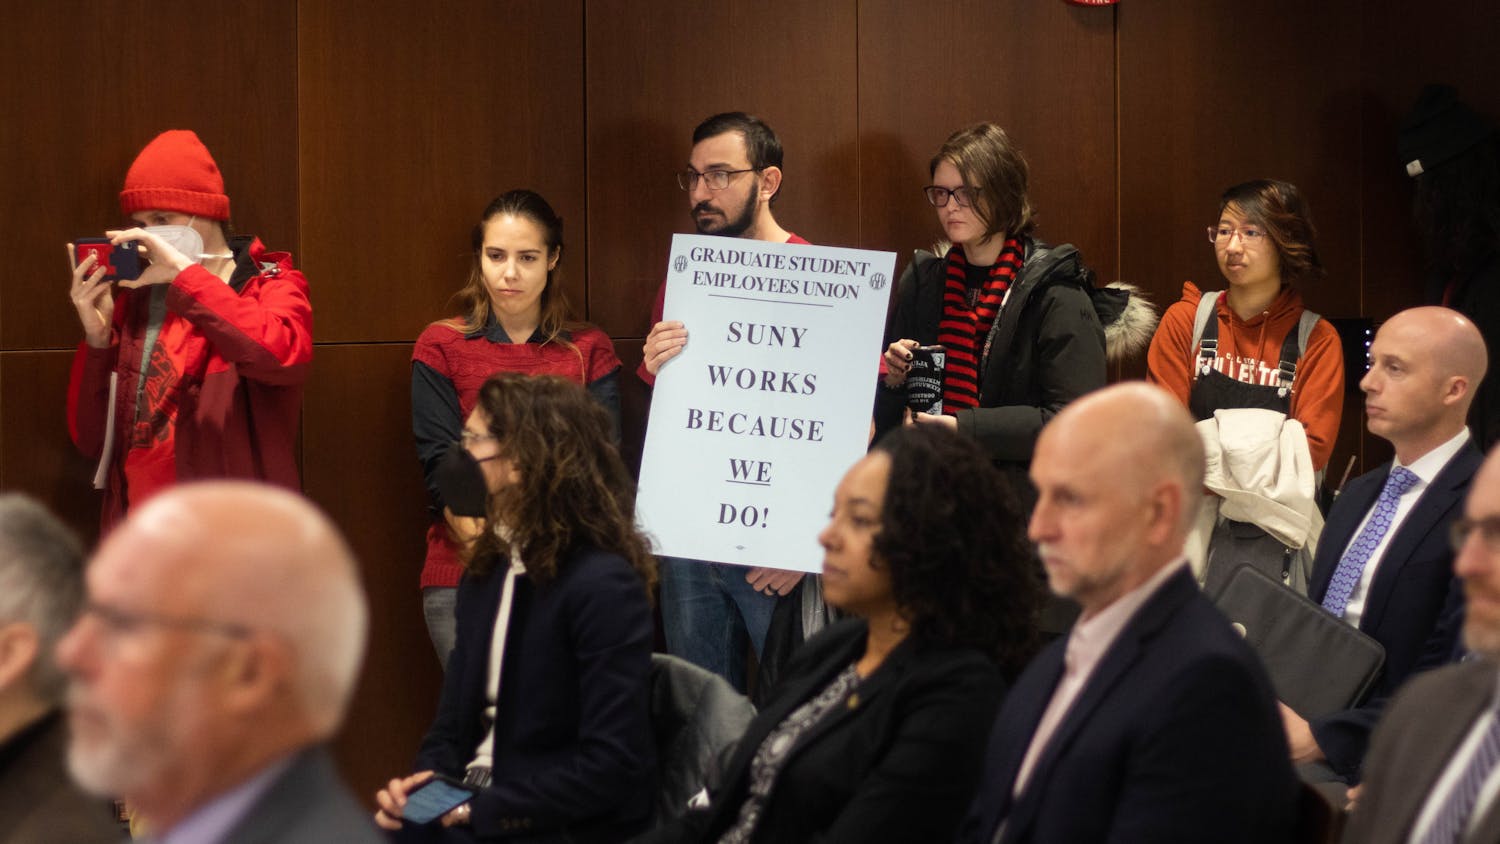 Graduate Student Employees Union members protested for higher minimum stipends and the elimination of fees during the December 2022 UB Council meeting.&nbsp;